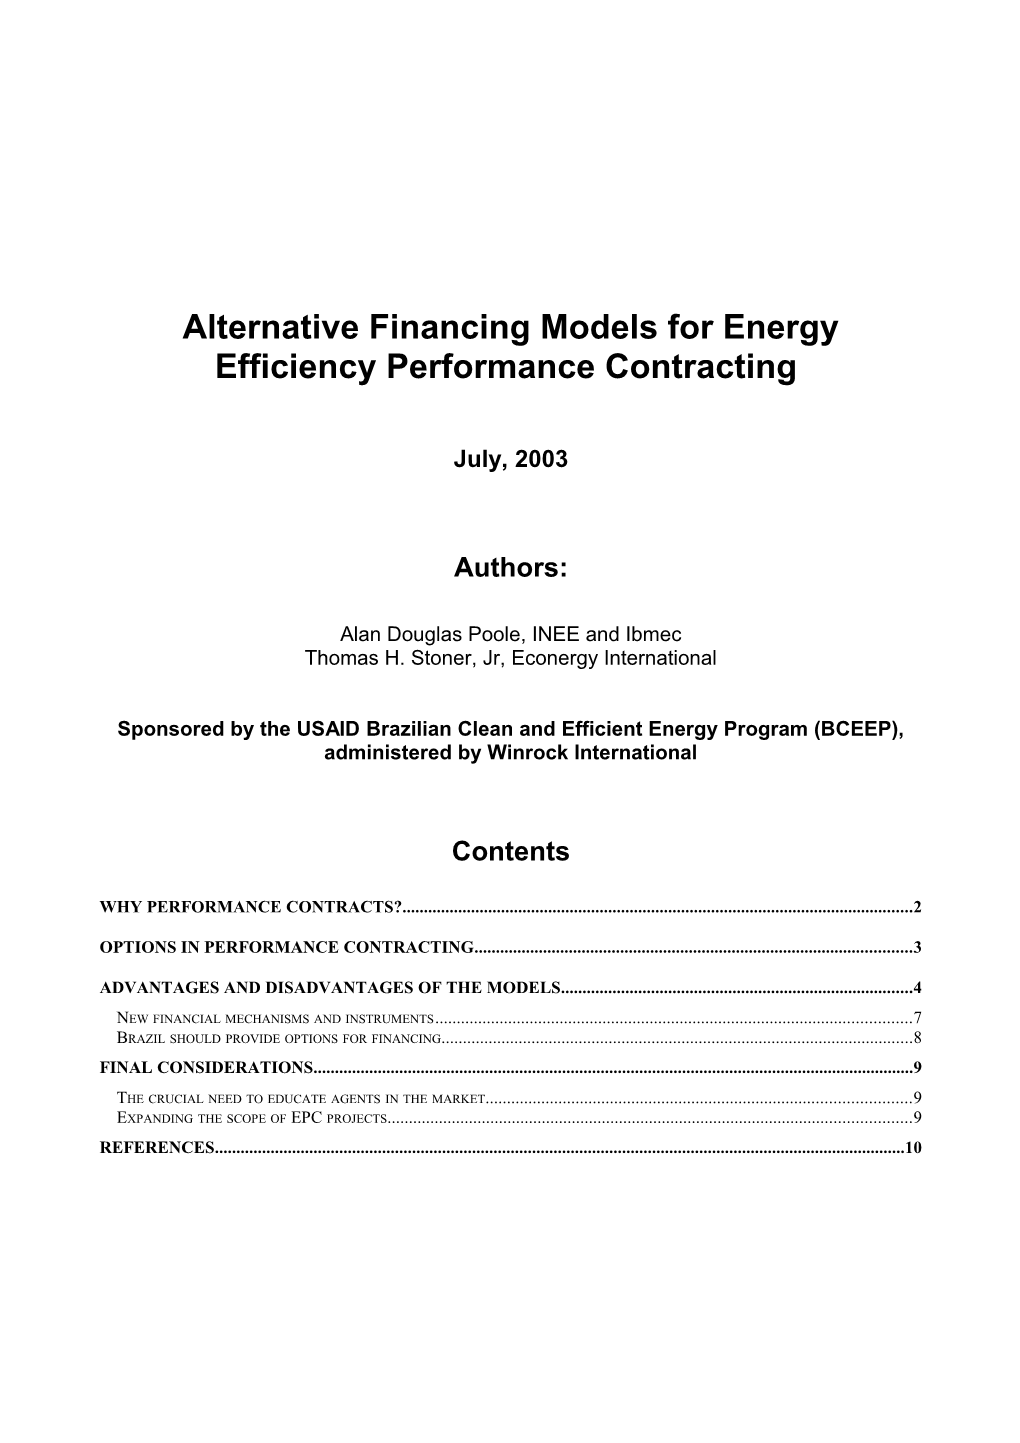 Alternative Financing Models for Energy Efficiency Performance Contracting